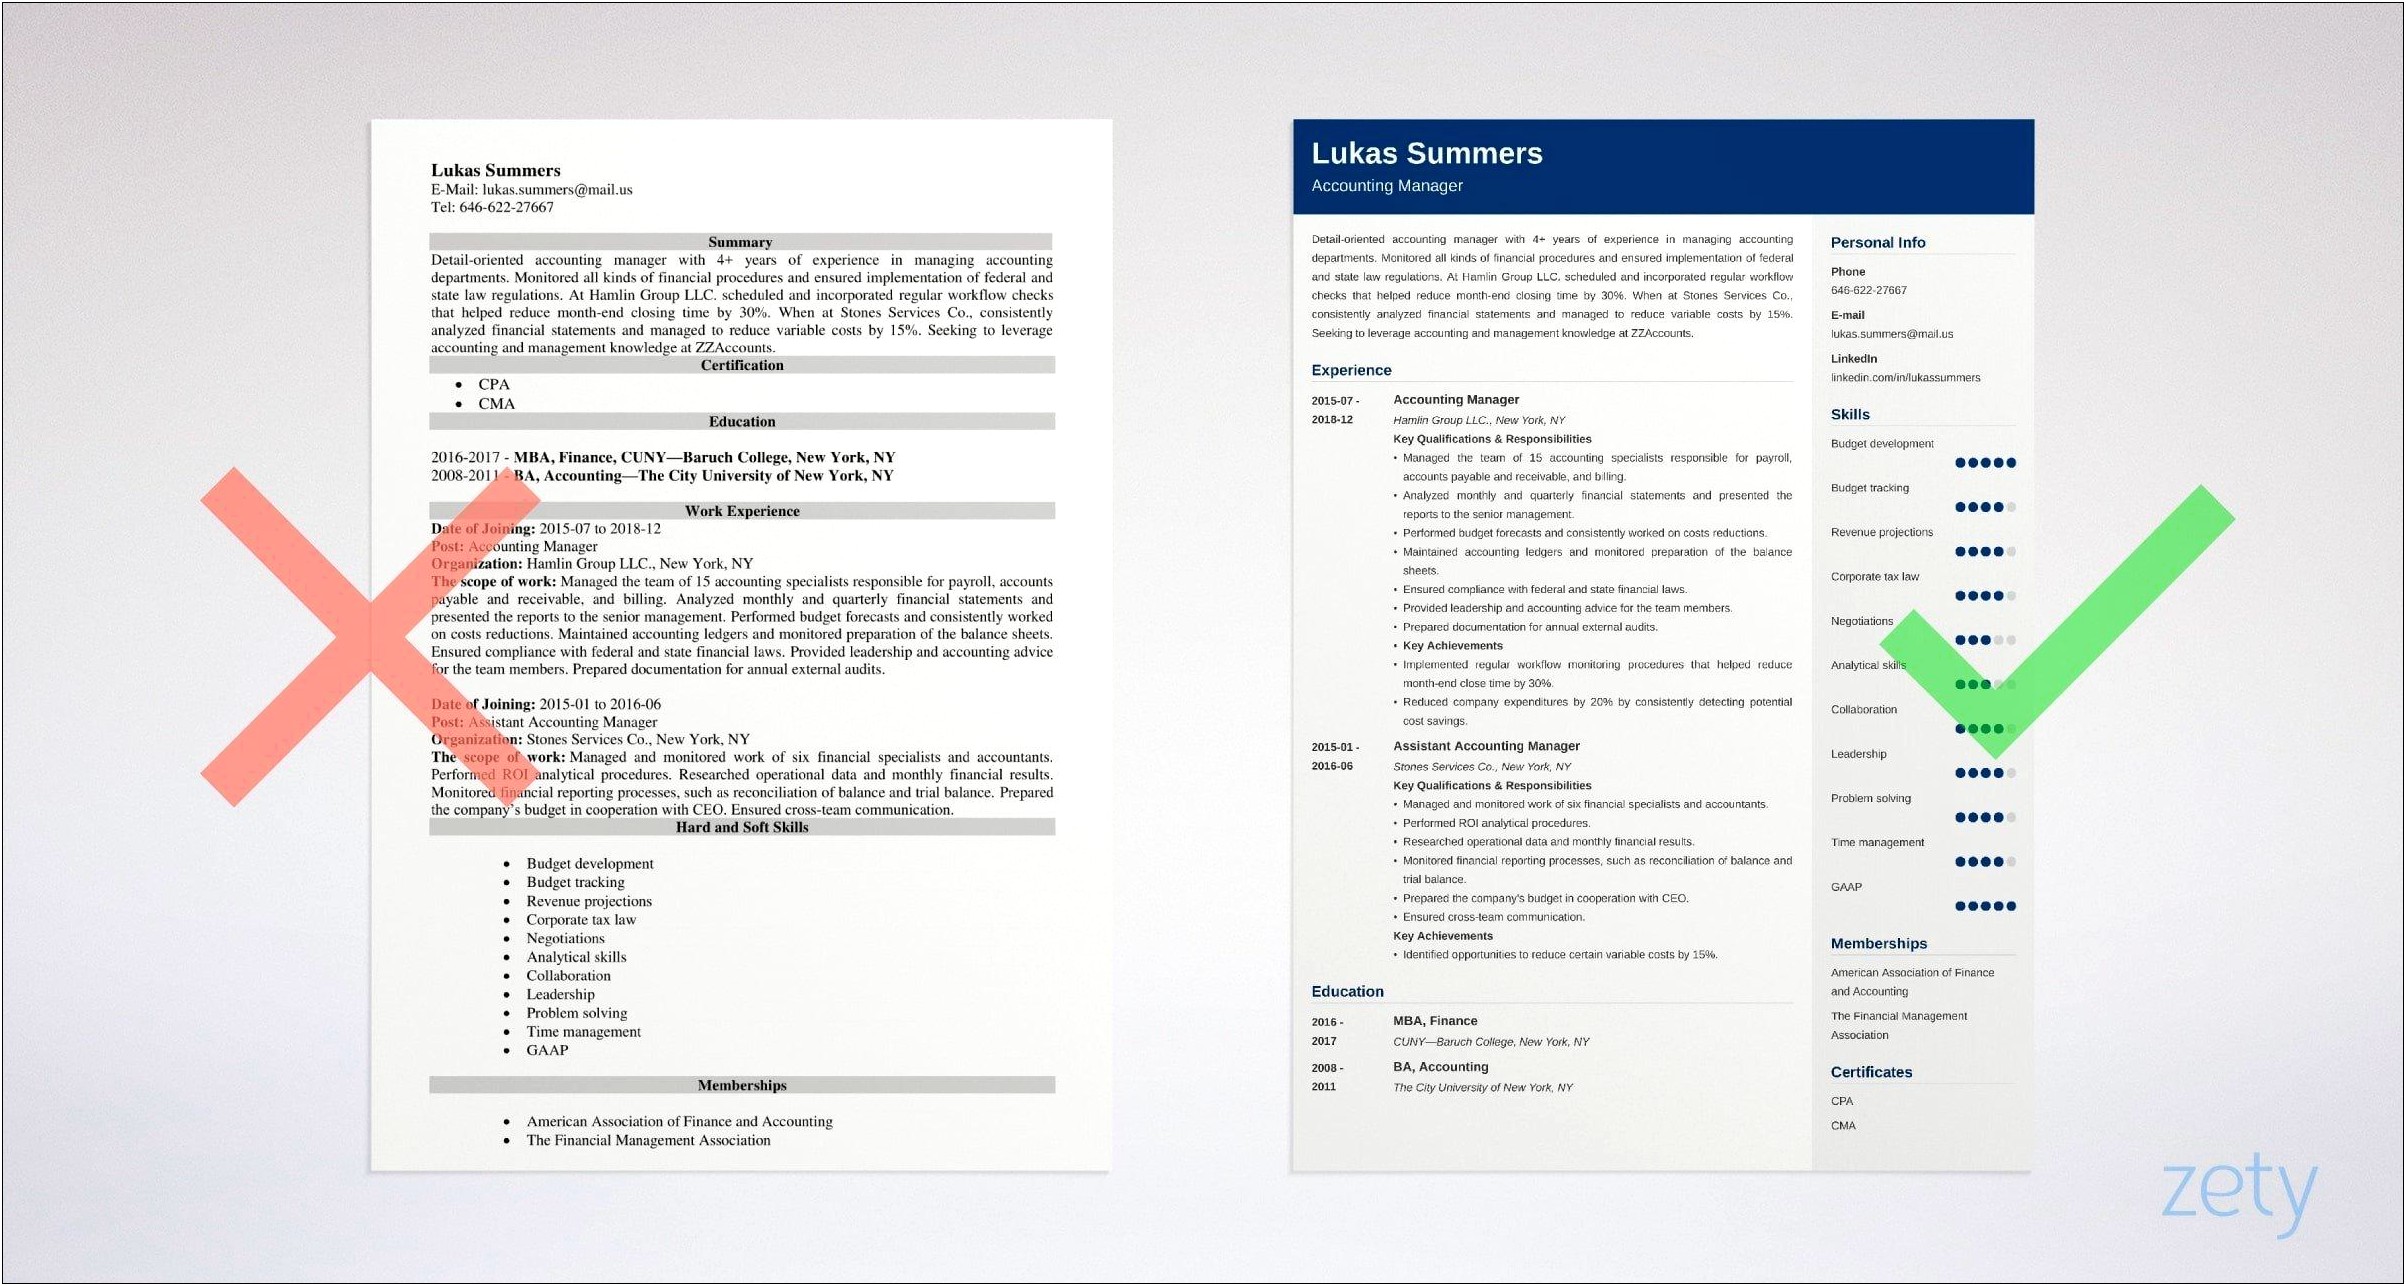 Good Resume Format For Finance Professional